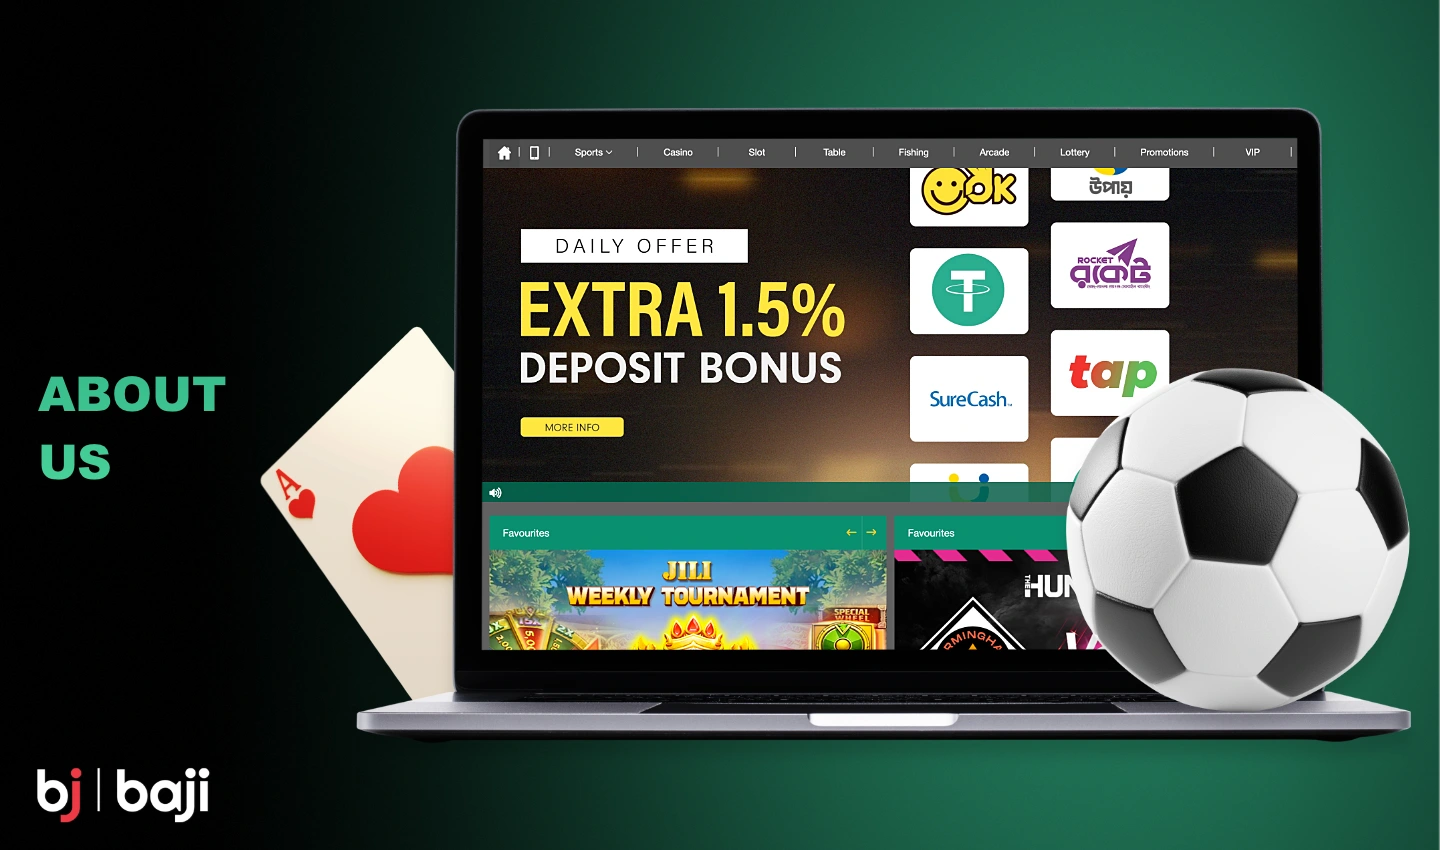 Baji has a proven track record of offering the best gambling experience to its customers